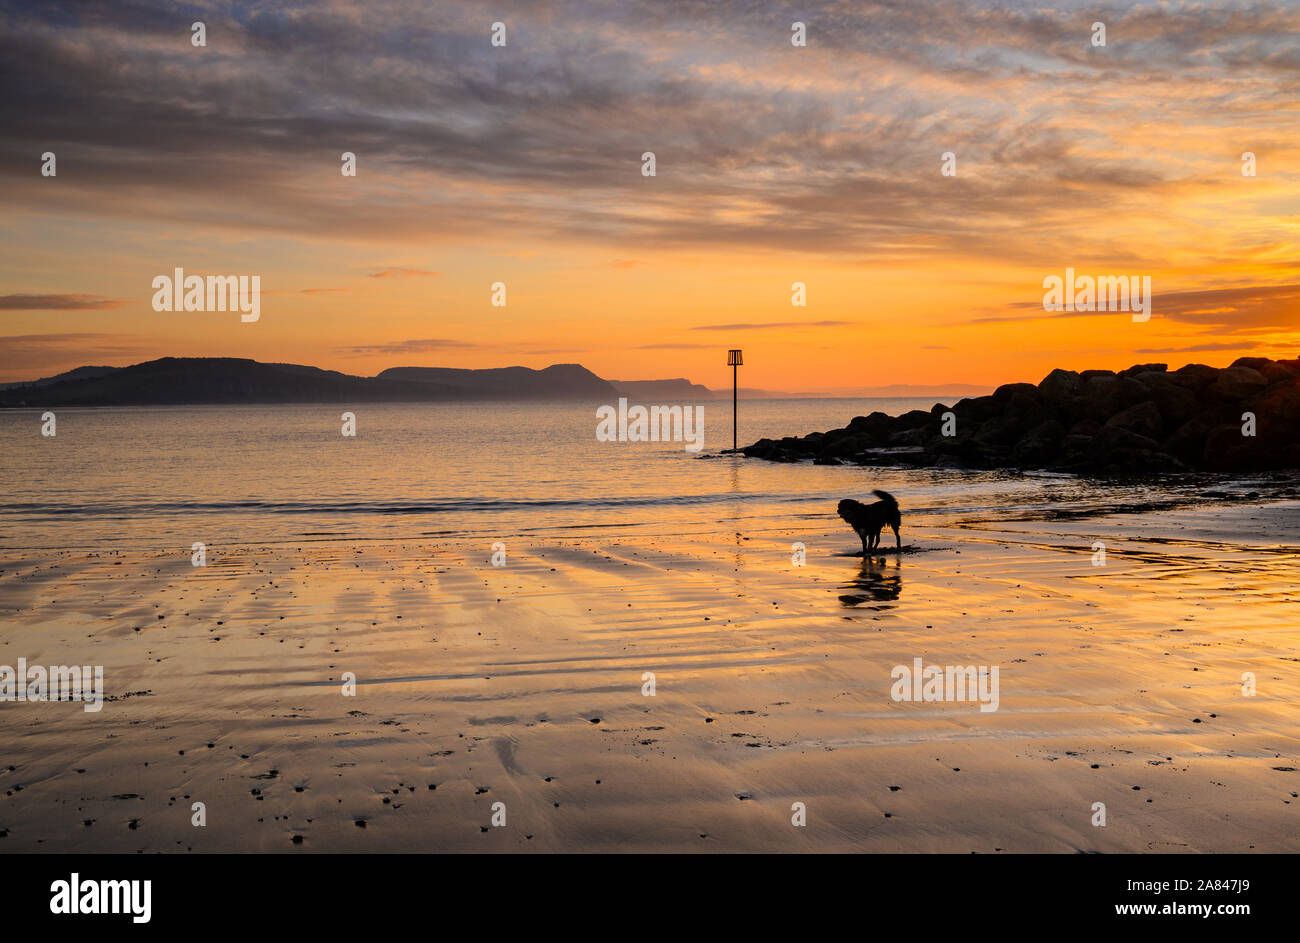 Lyme Regis, Dorset, UK. 6th November 2019. UK Weather: After a tranquil morning clouds start to gather over the Jurassic Coast heralding the arrival of unsettled weather. The early sunshine is reflected in the sand at low tide.  Credit: Celia McMahon/Alamy Live News. Stock Photo